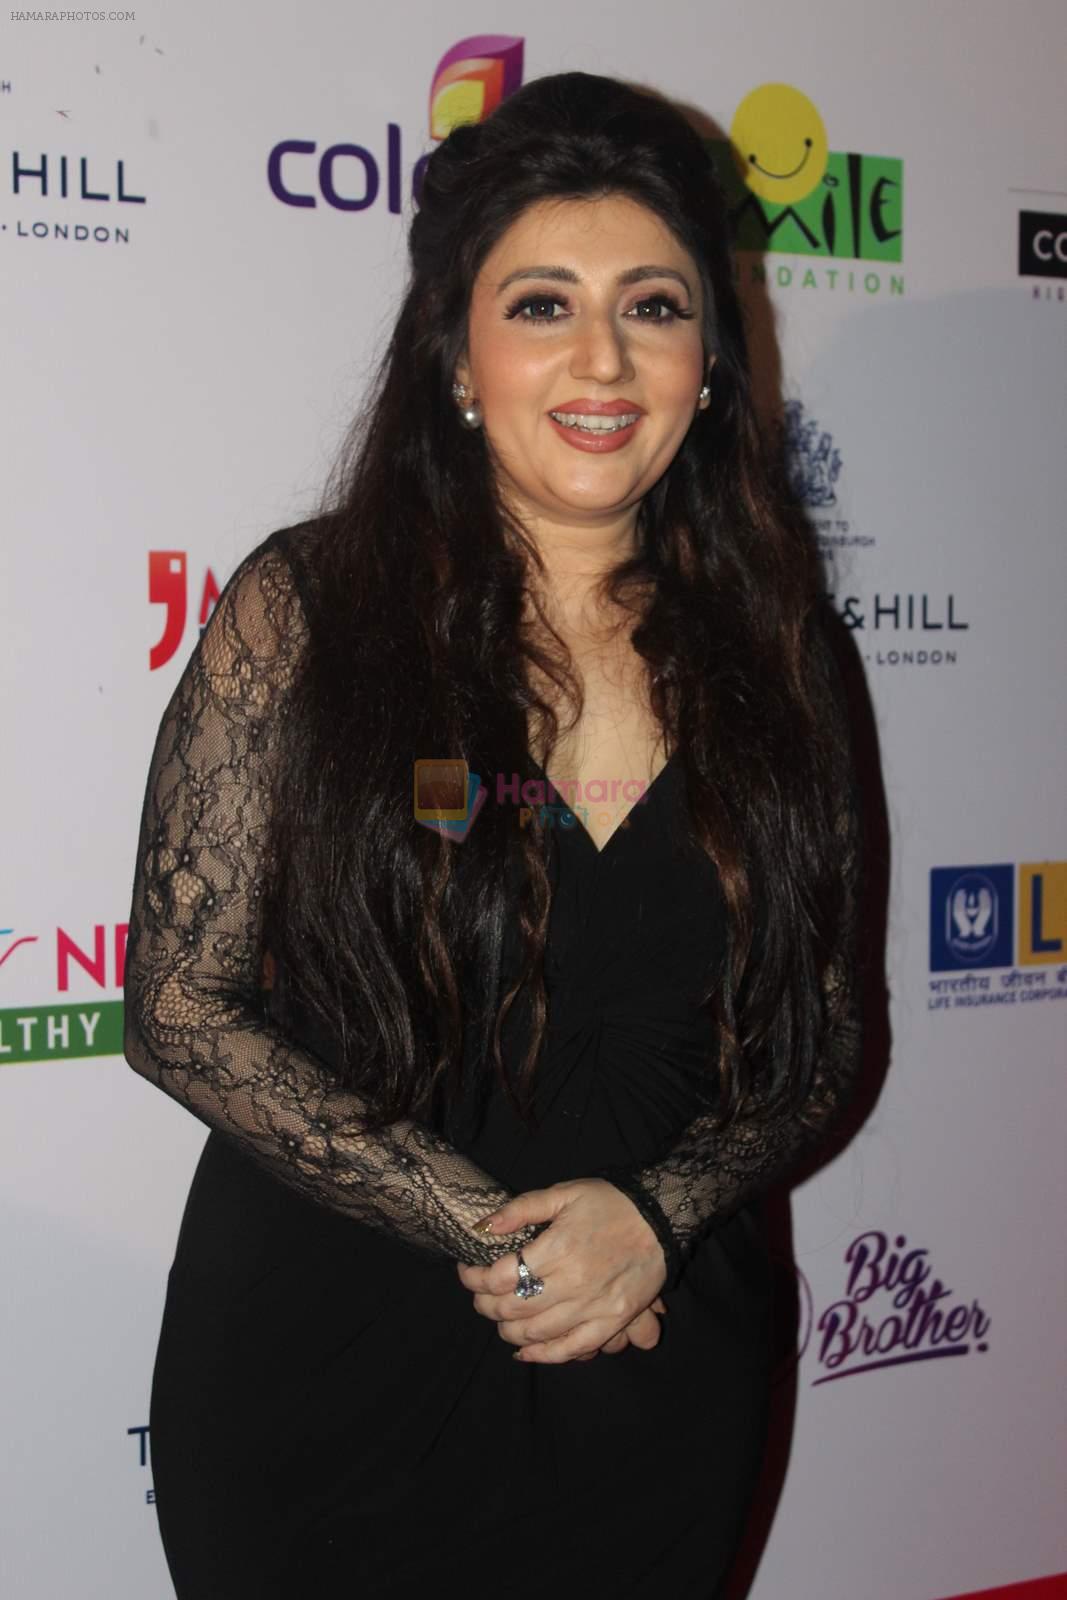 Archana Kochhar at Smile Foundation show with True Fitt & Hill styling in Rennaisance on 15th March 2015